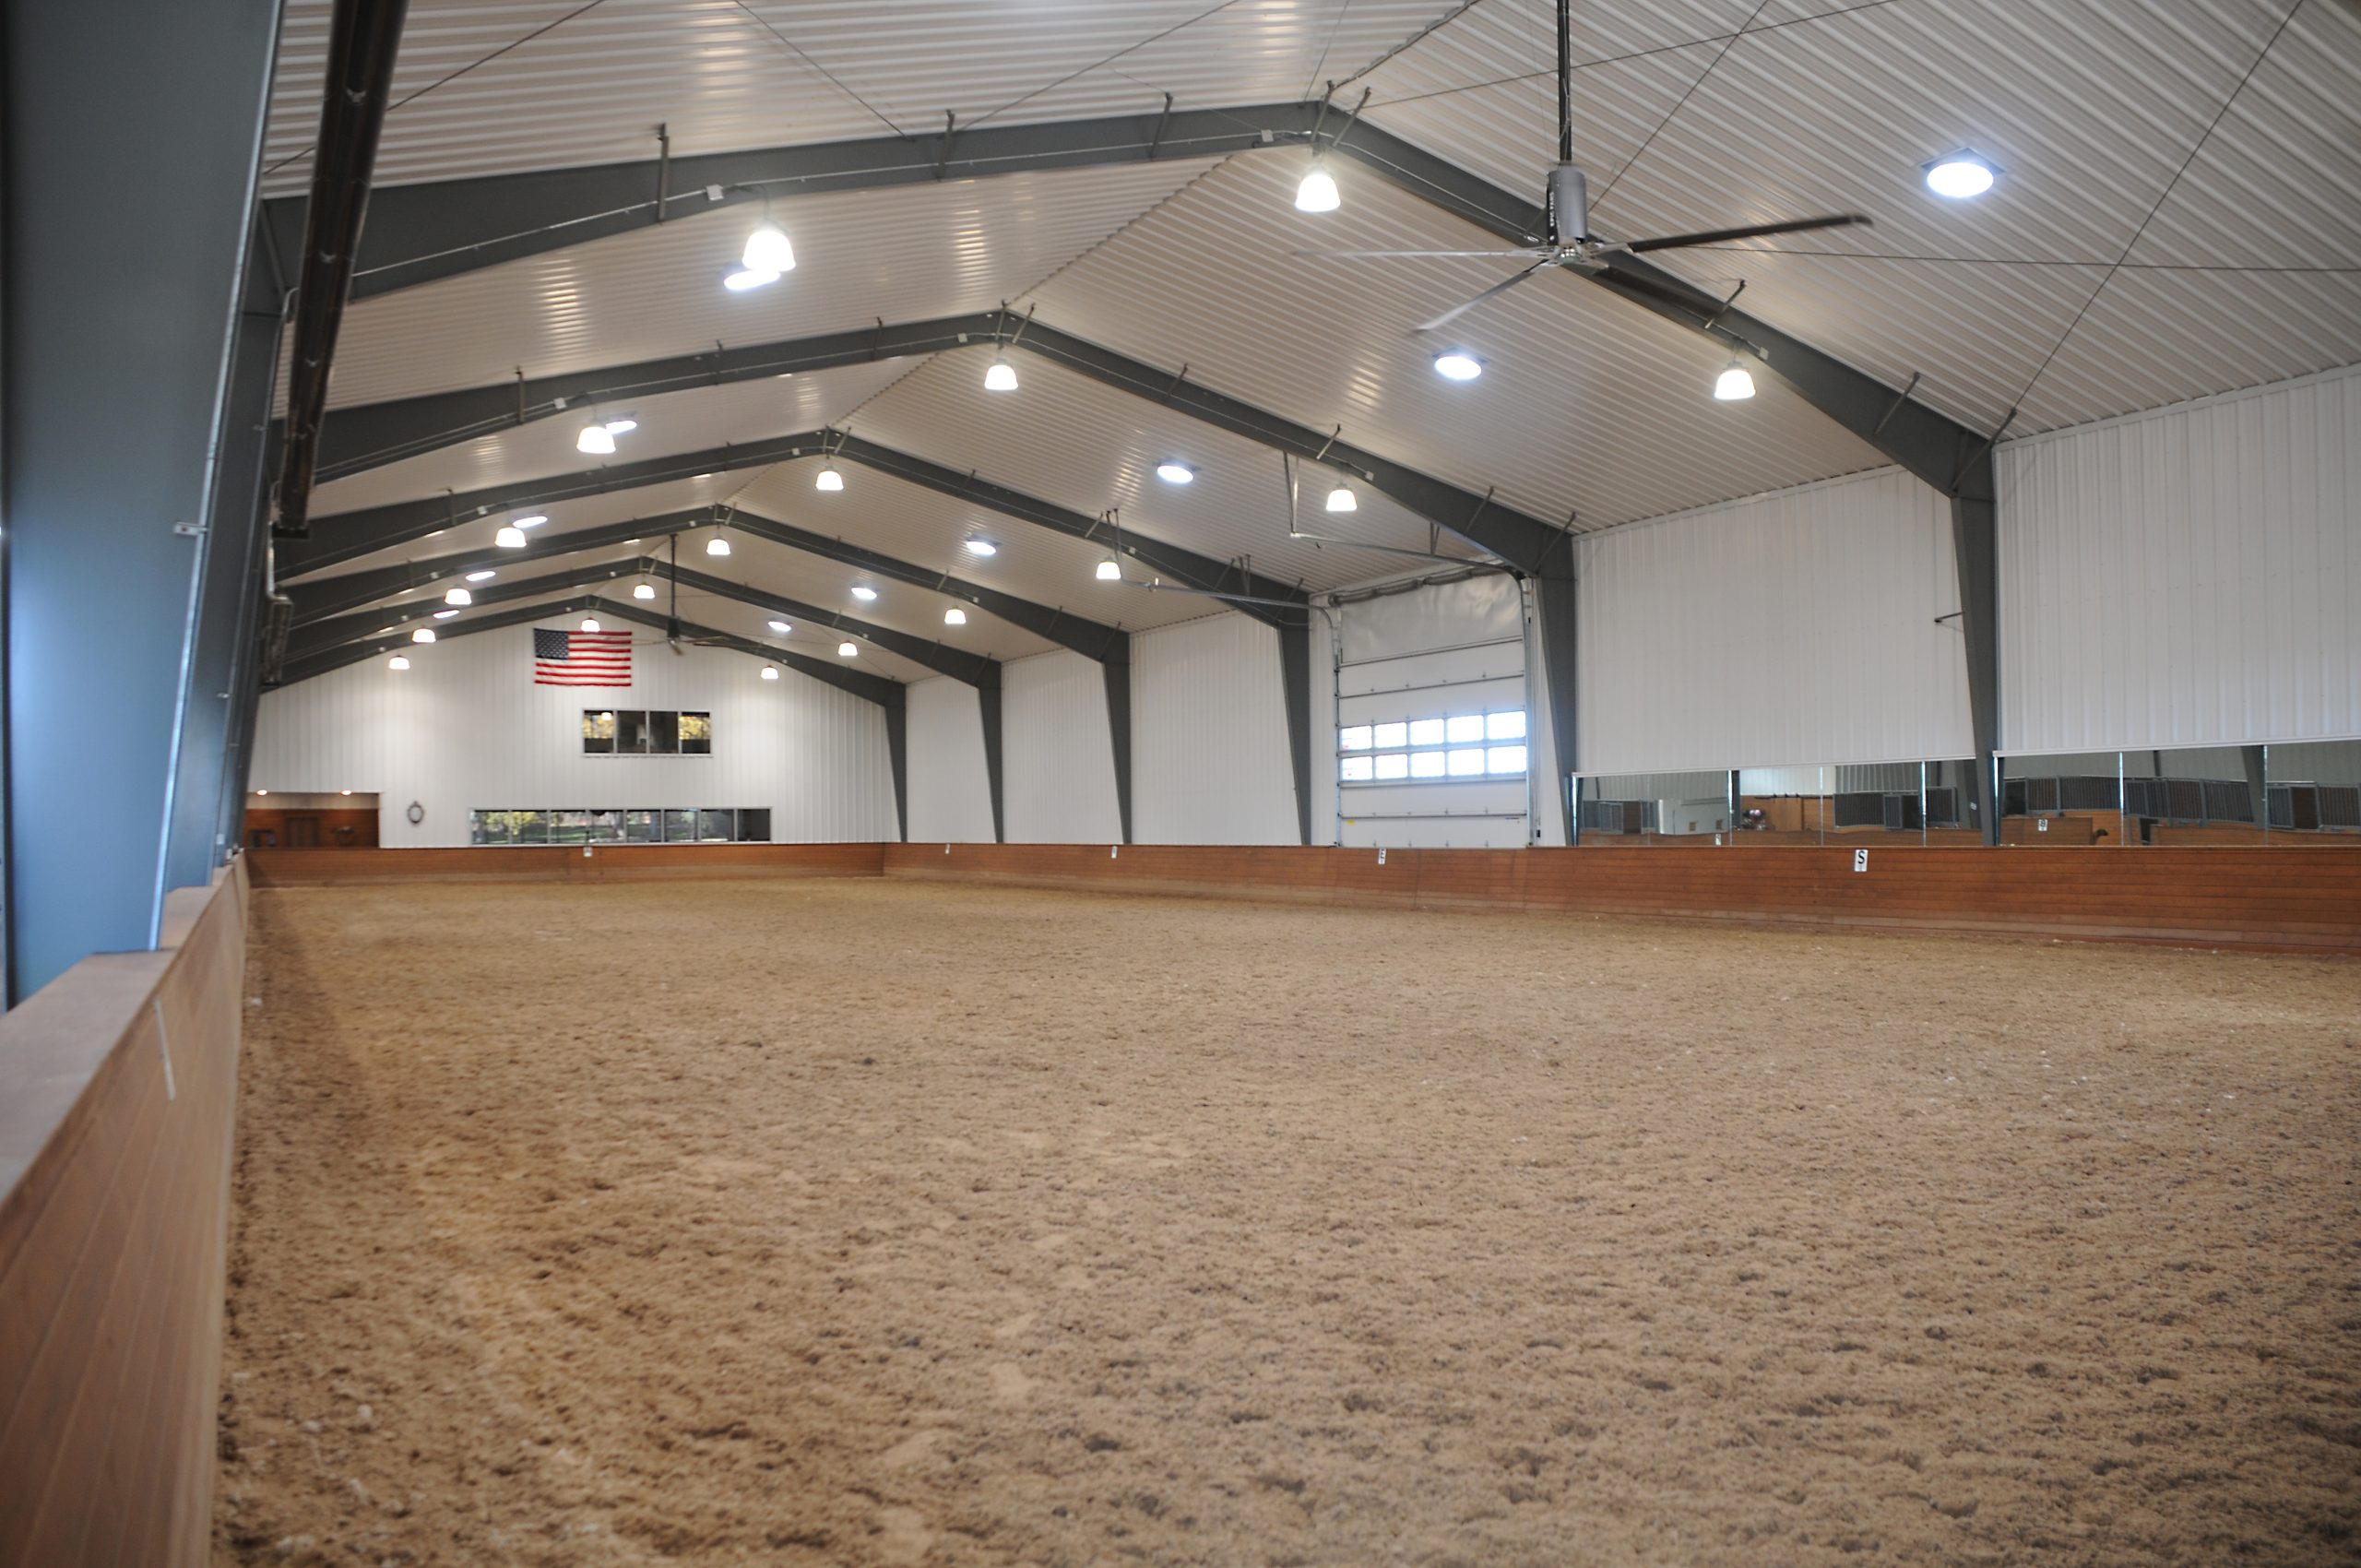 Project of the Month: Equestrian Arena